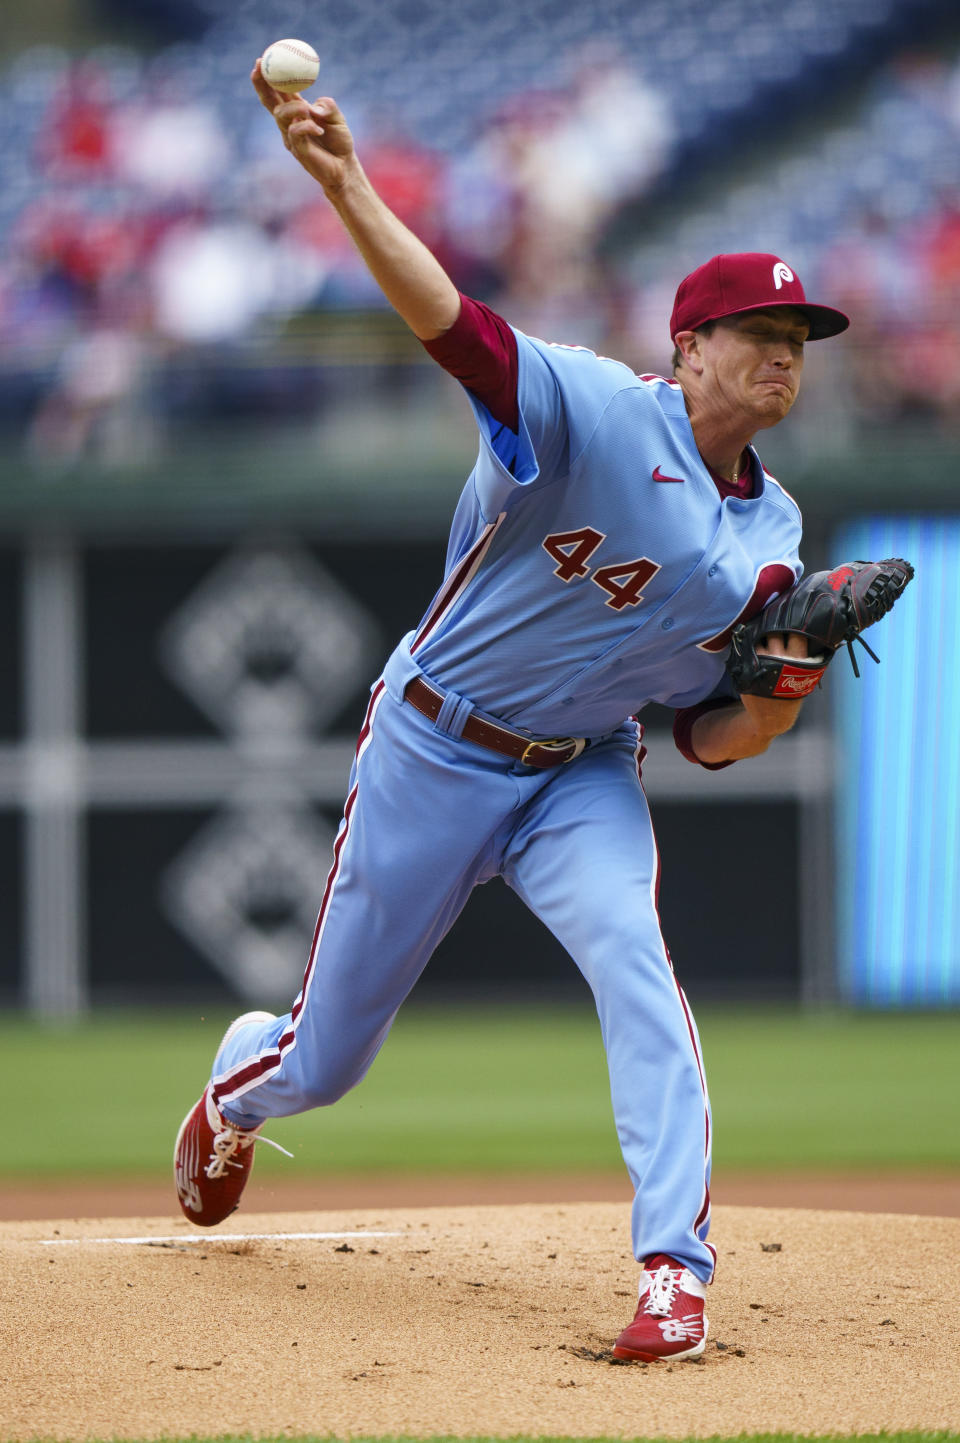 Philadelphia Phillies starting pitcher Kyle Gibson throws during the first inning of a baseball game against the San Diego Padres, Thursday, May 19, 2022, in Philadelphia. (AP Photo/Chris Szagola)